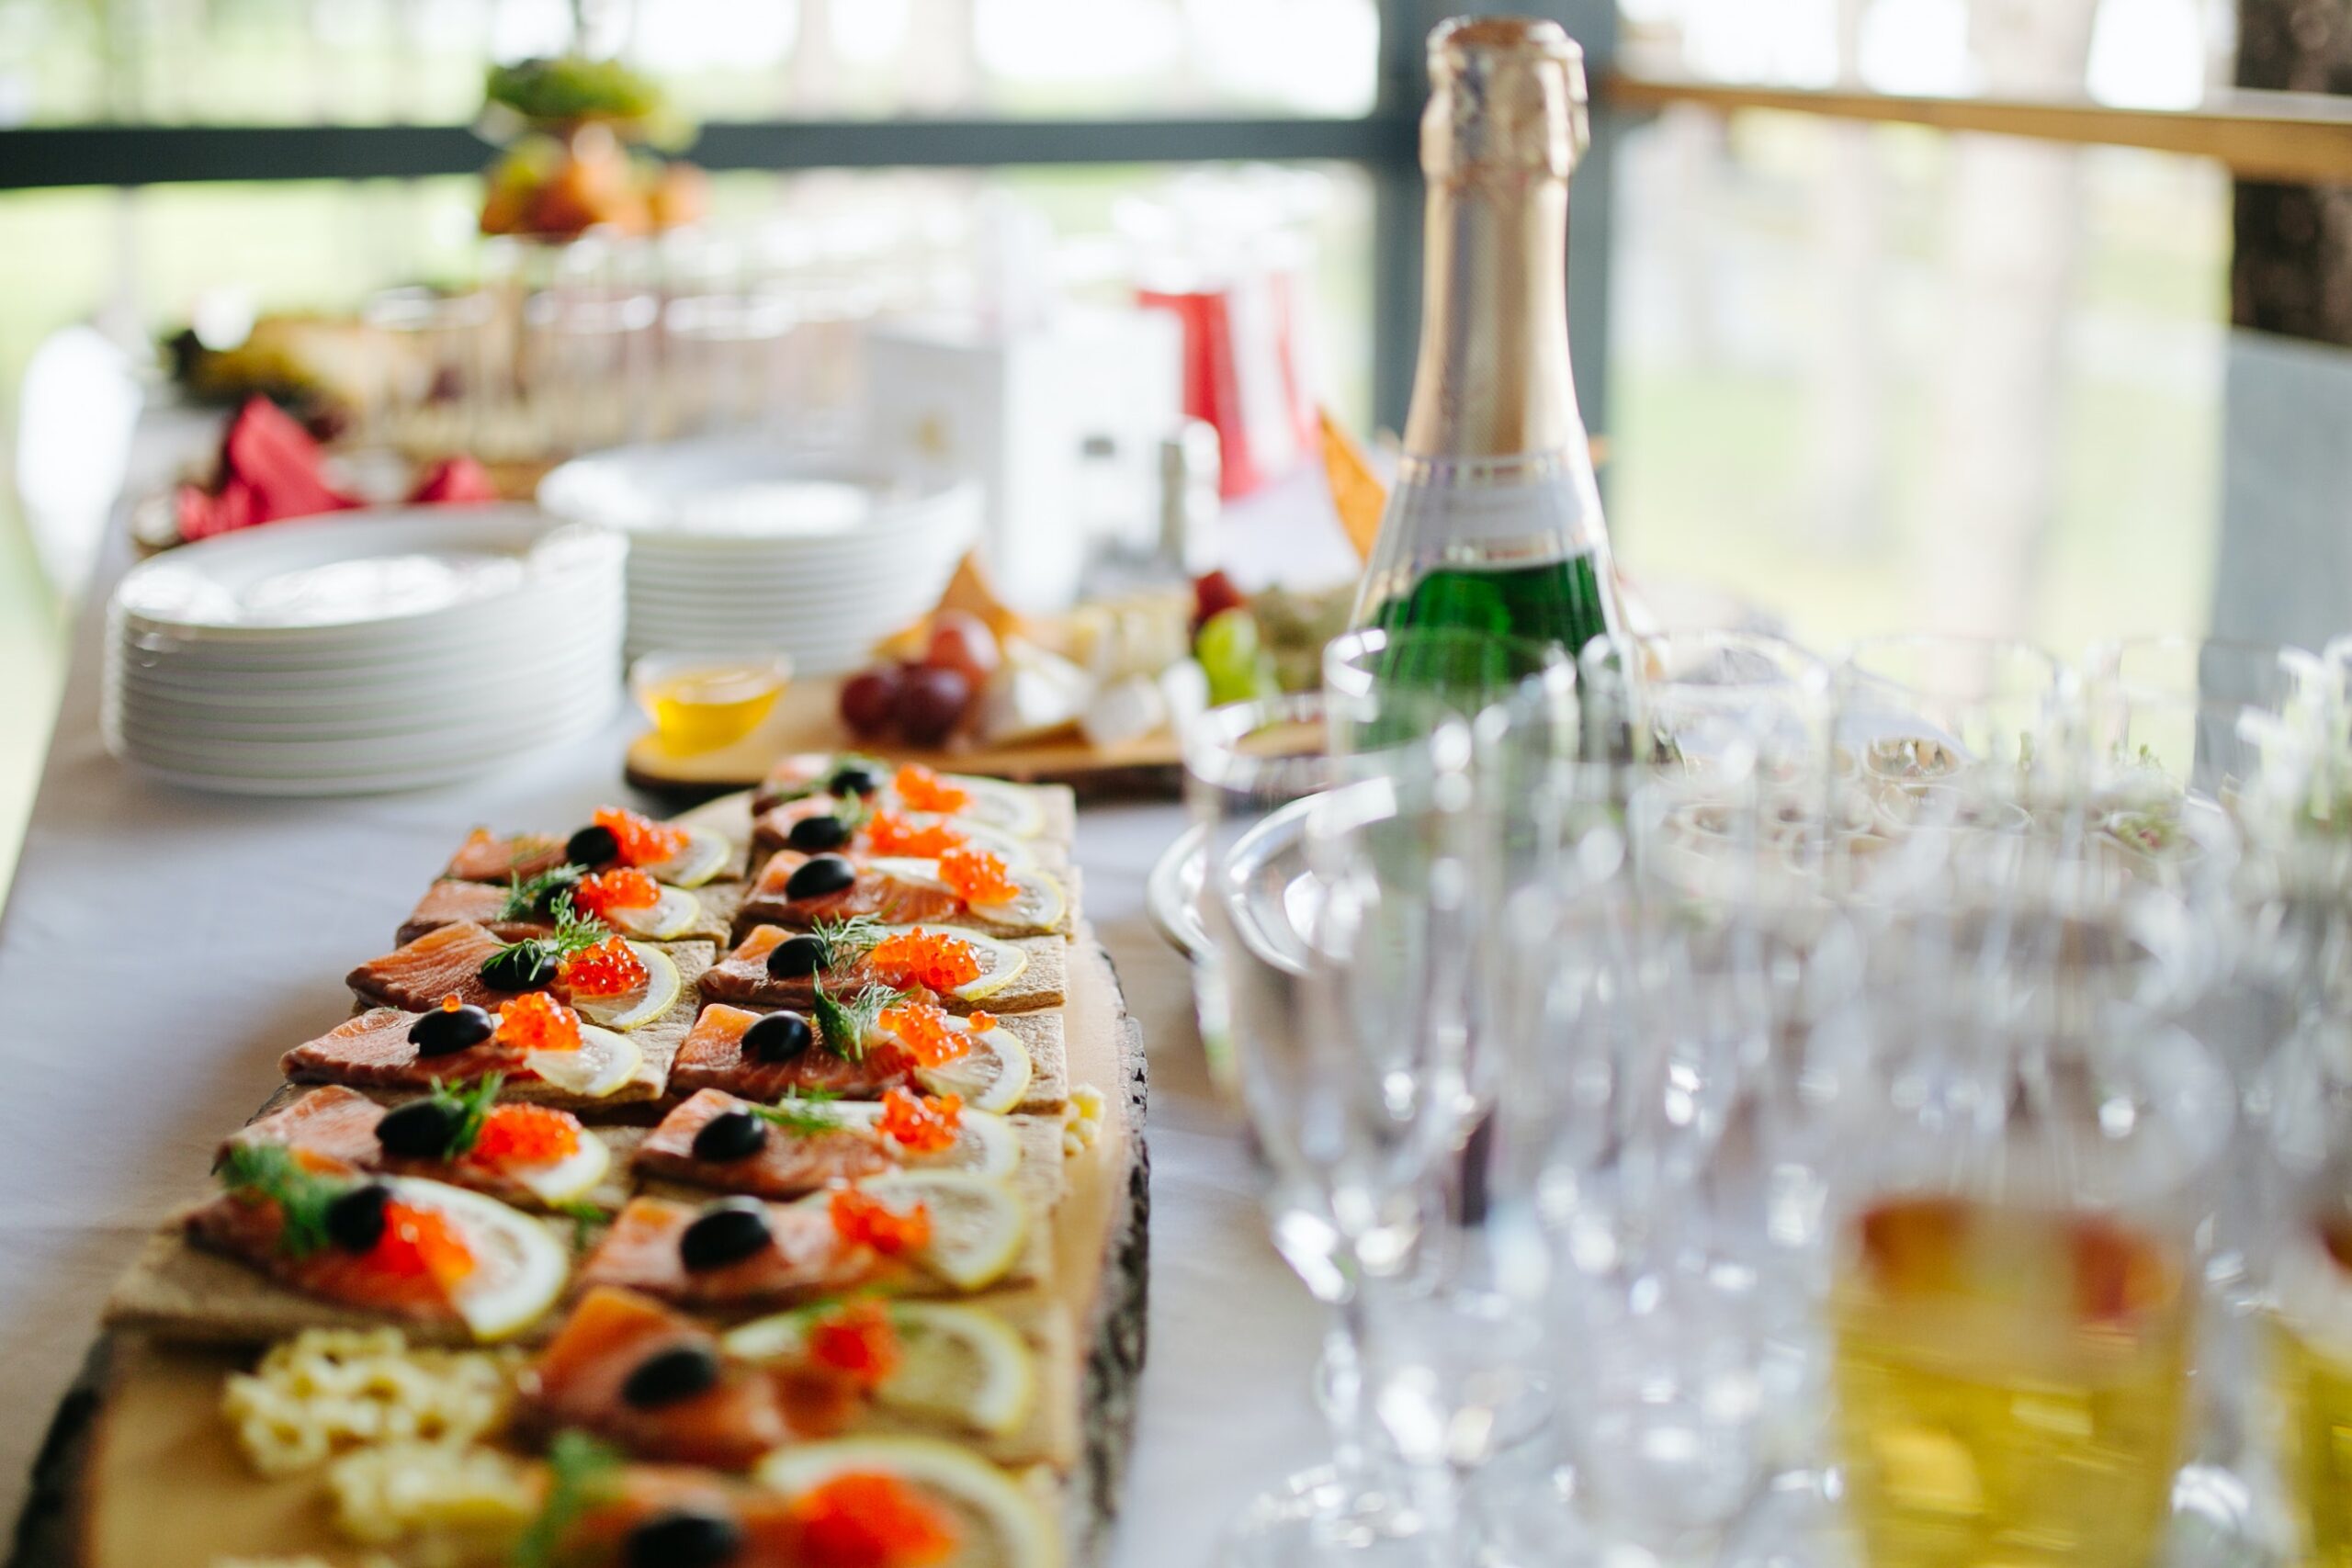 Beverage Catering: How Does It Work?